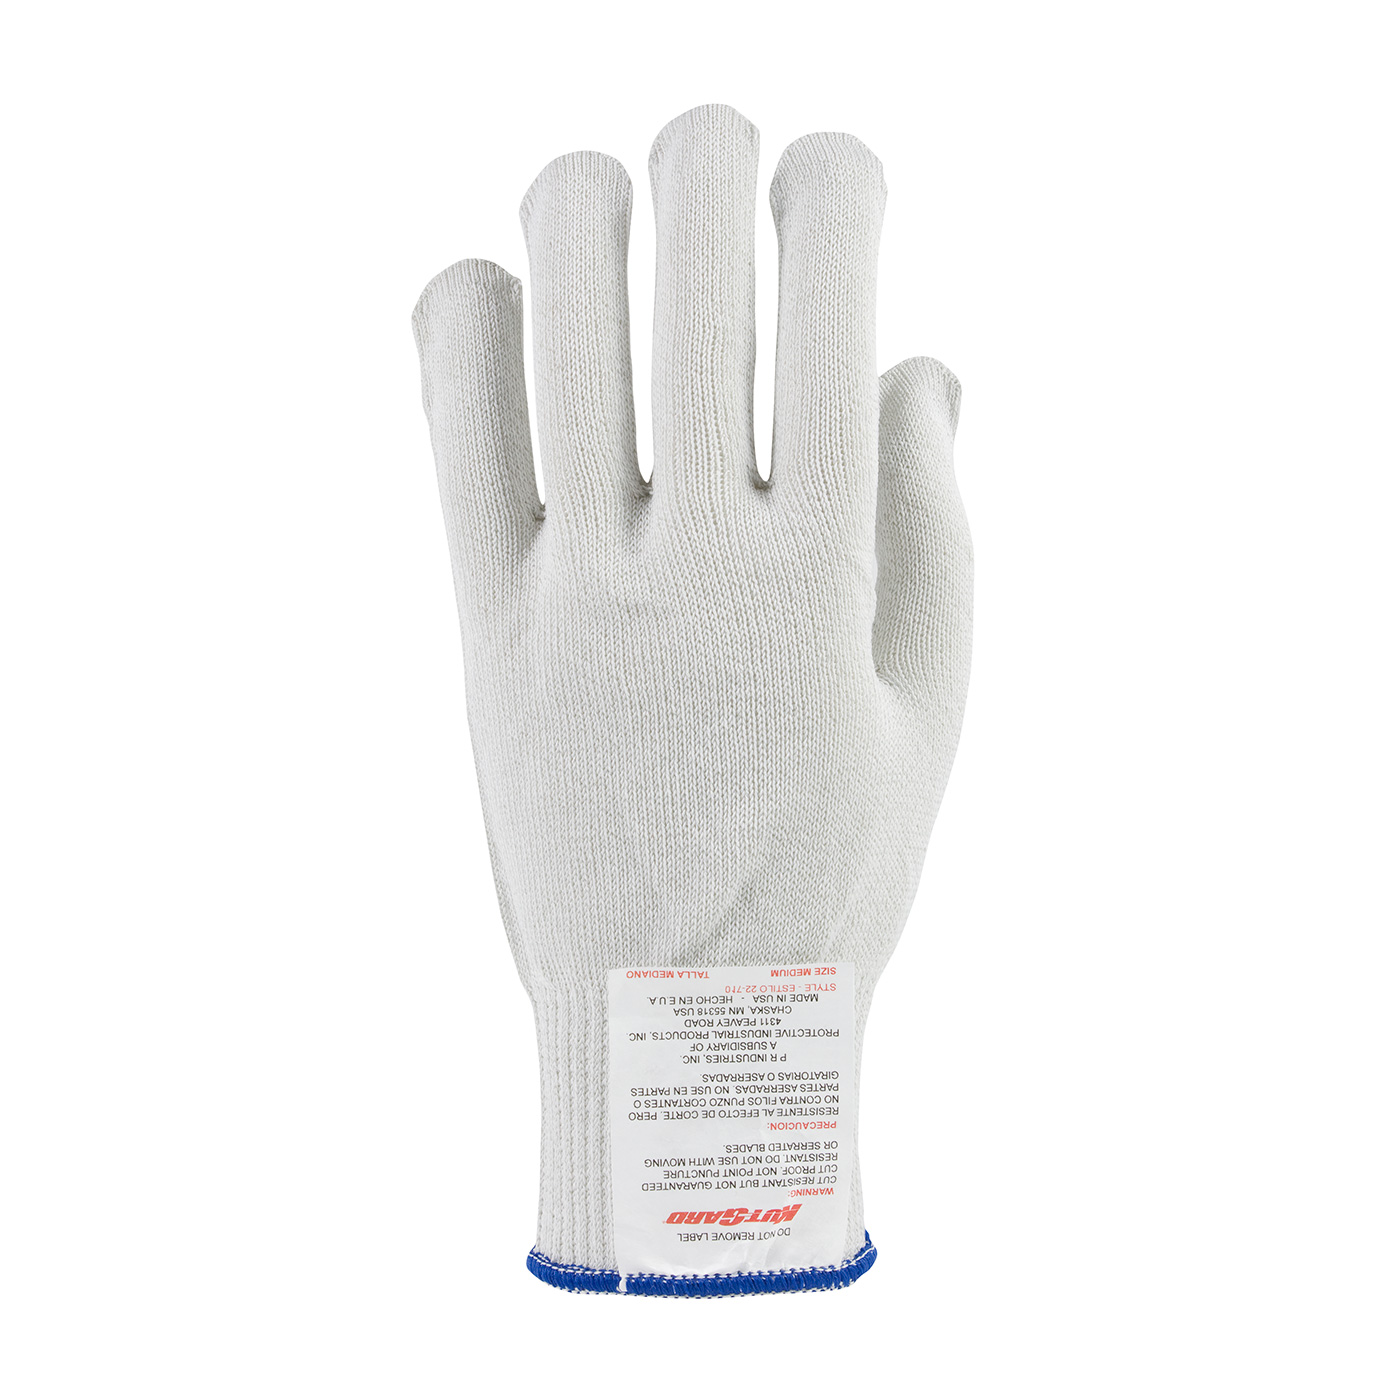 Traffiglove TG3090 Traffi Iconic 3 Cut Level 4 PPE Protective Work Glove Size 7 